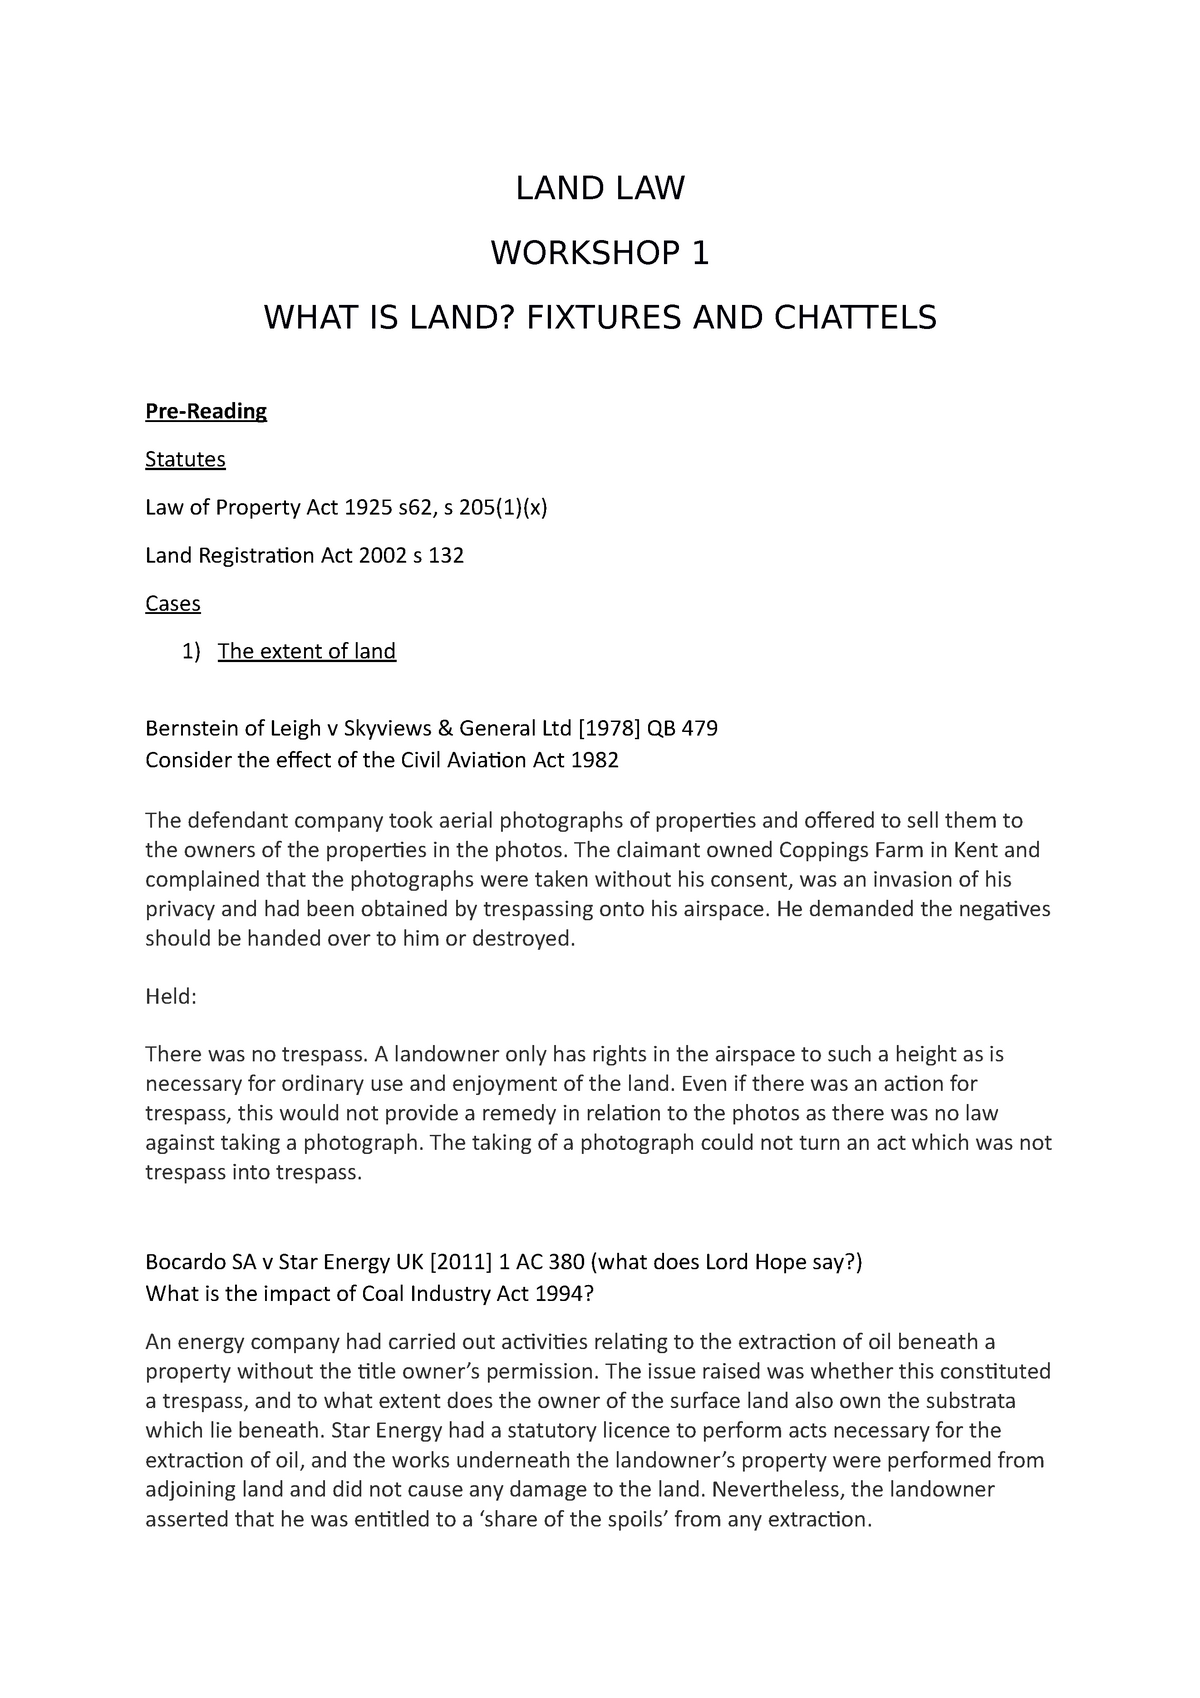 land law fixtures and chattels essay